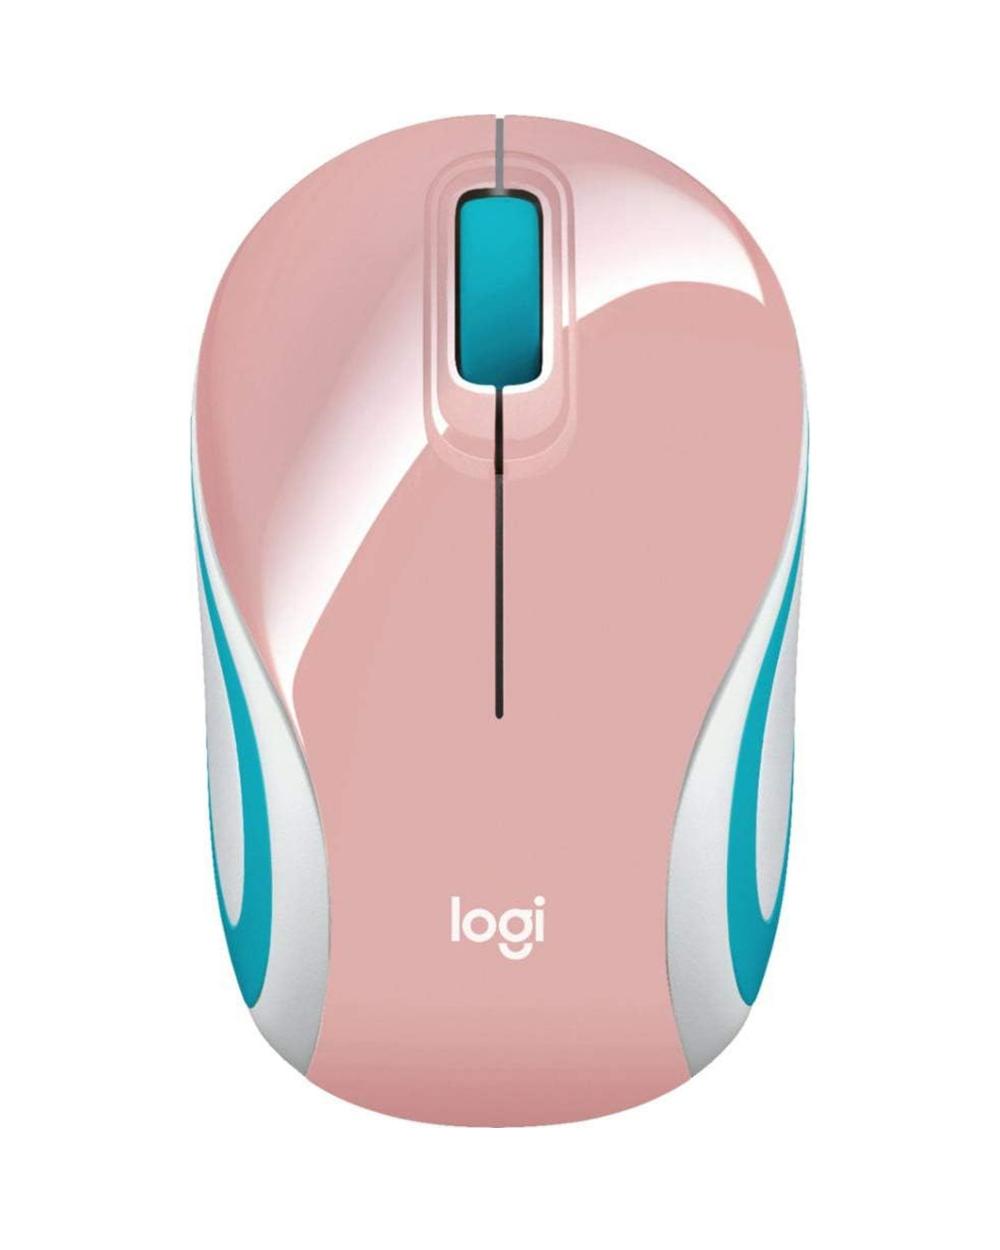 Logitech Wireless Ultra Portable Mouse 2.4 GHz - Assorted Colors